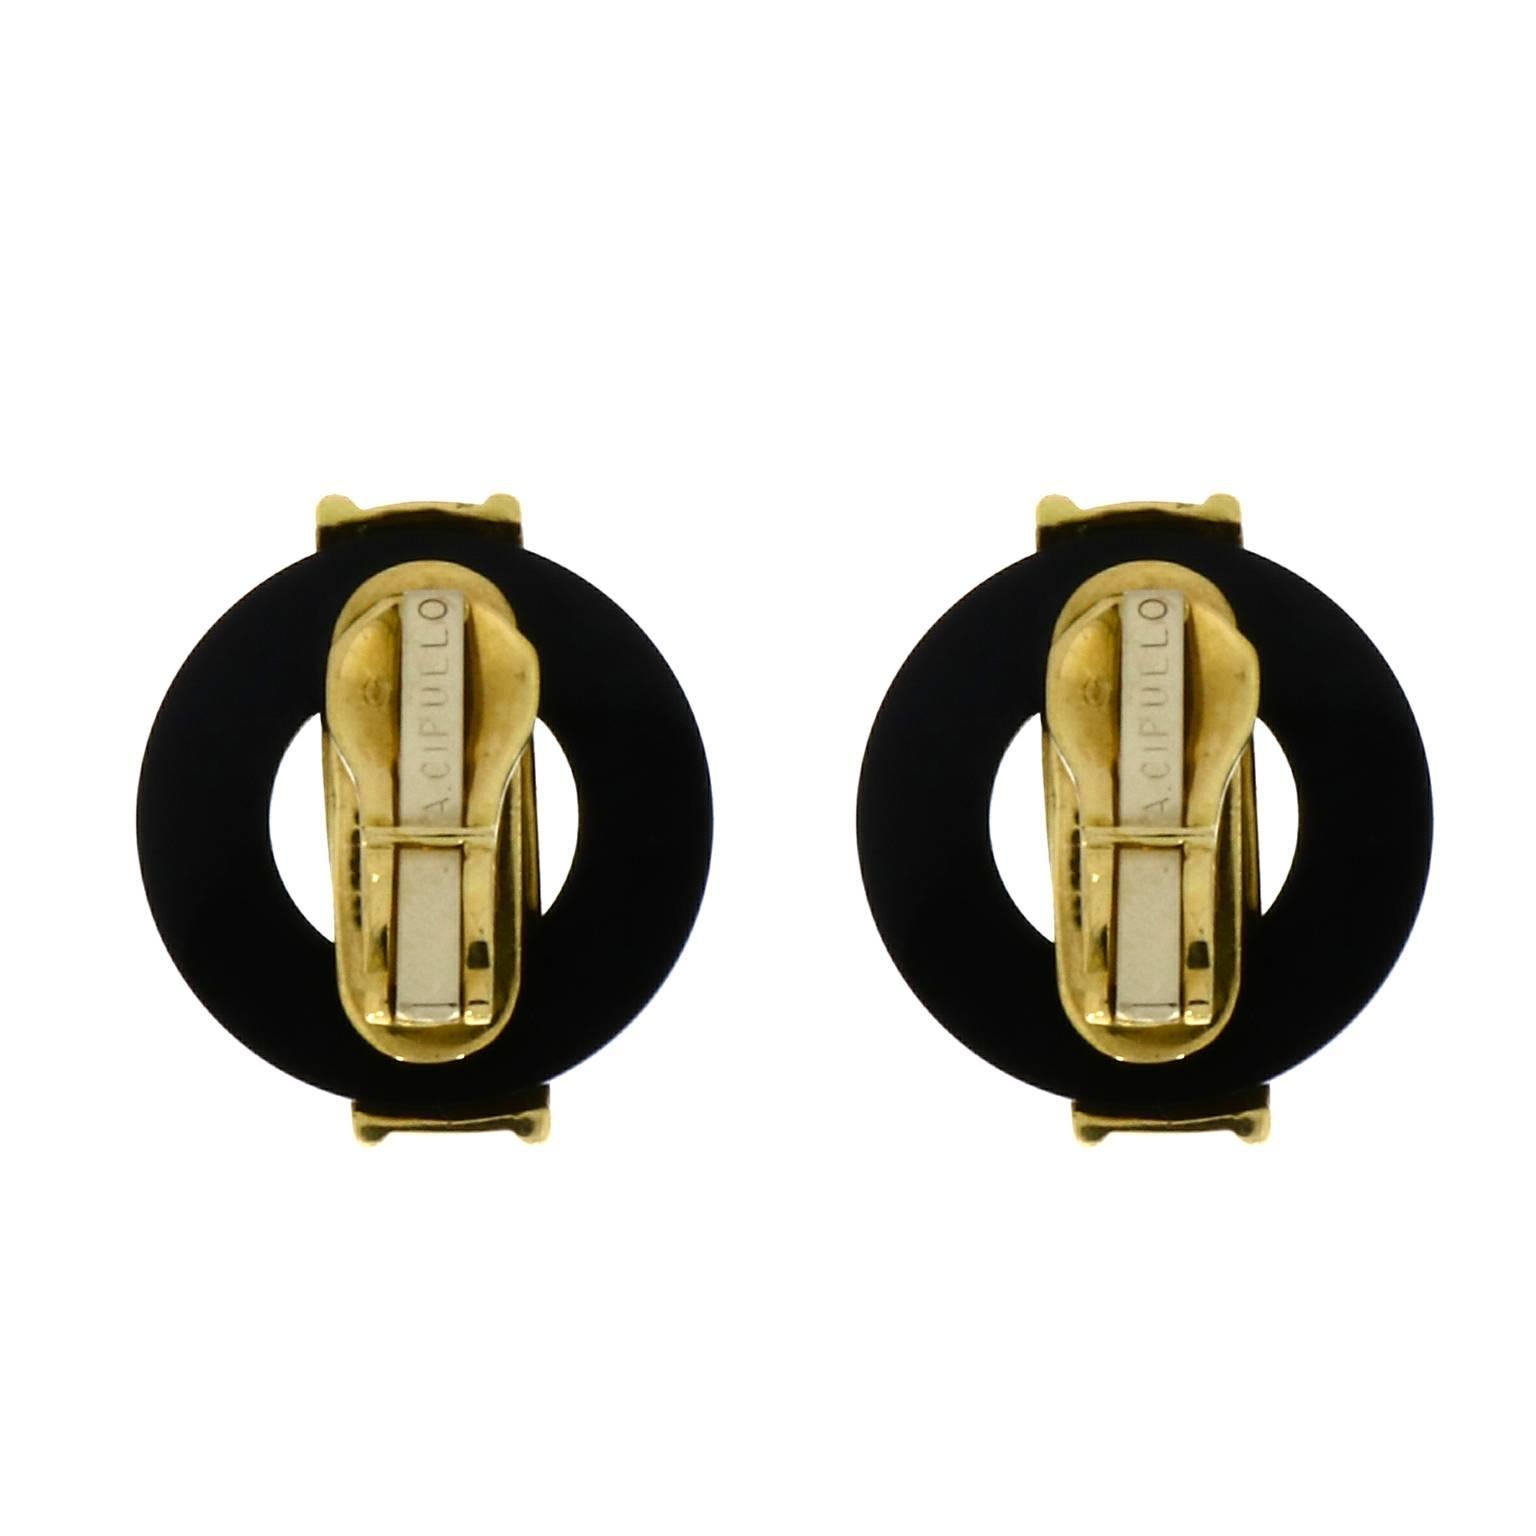 A Pair of Gold and Onyx earrings by Aldo Cipullo
Onyx, Gold 18K
Circa 1970
Signed A.Cipullo and Cartier